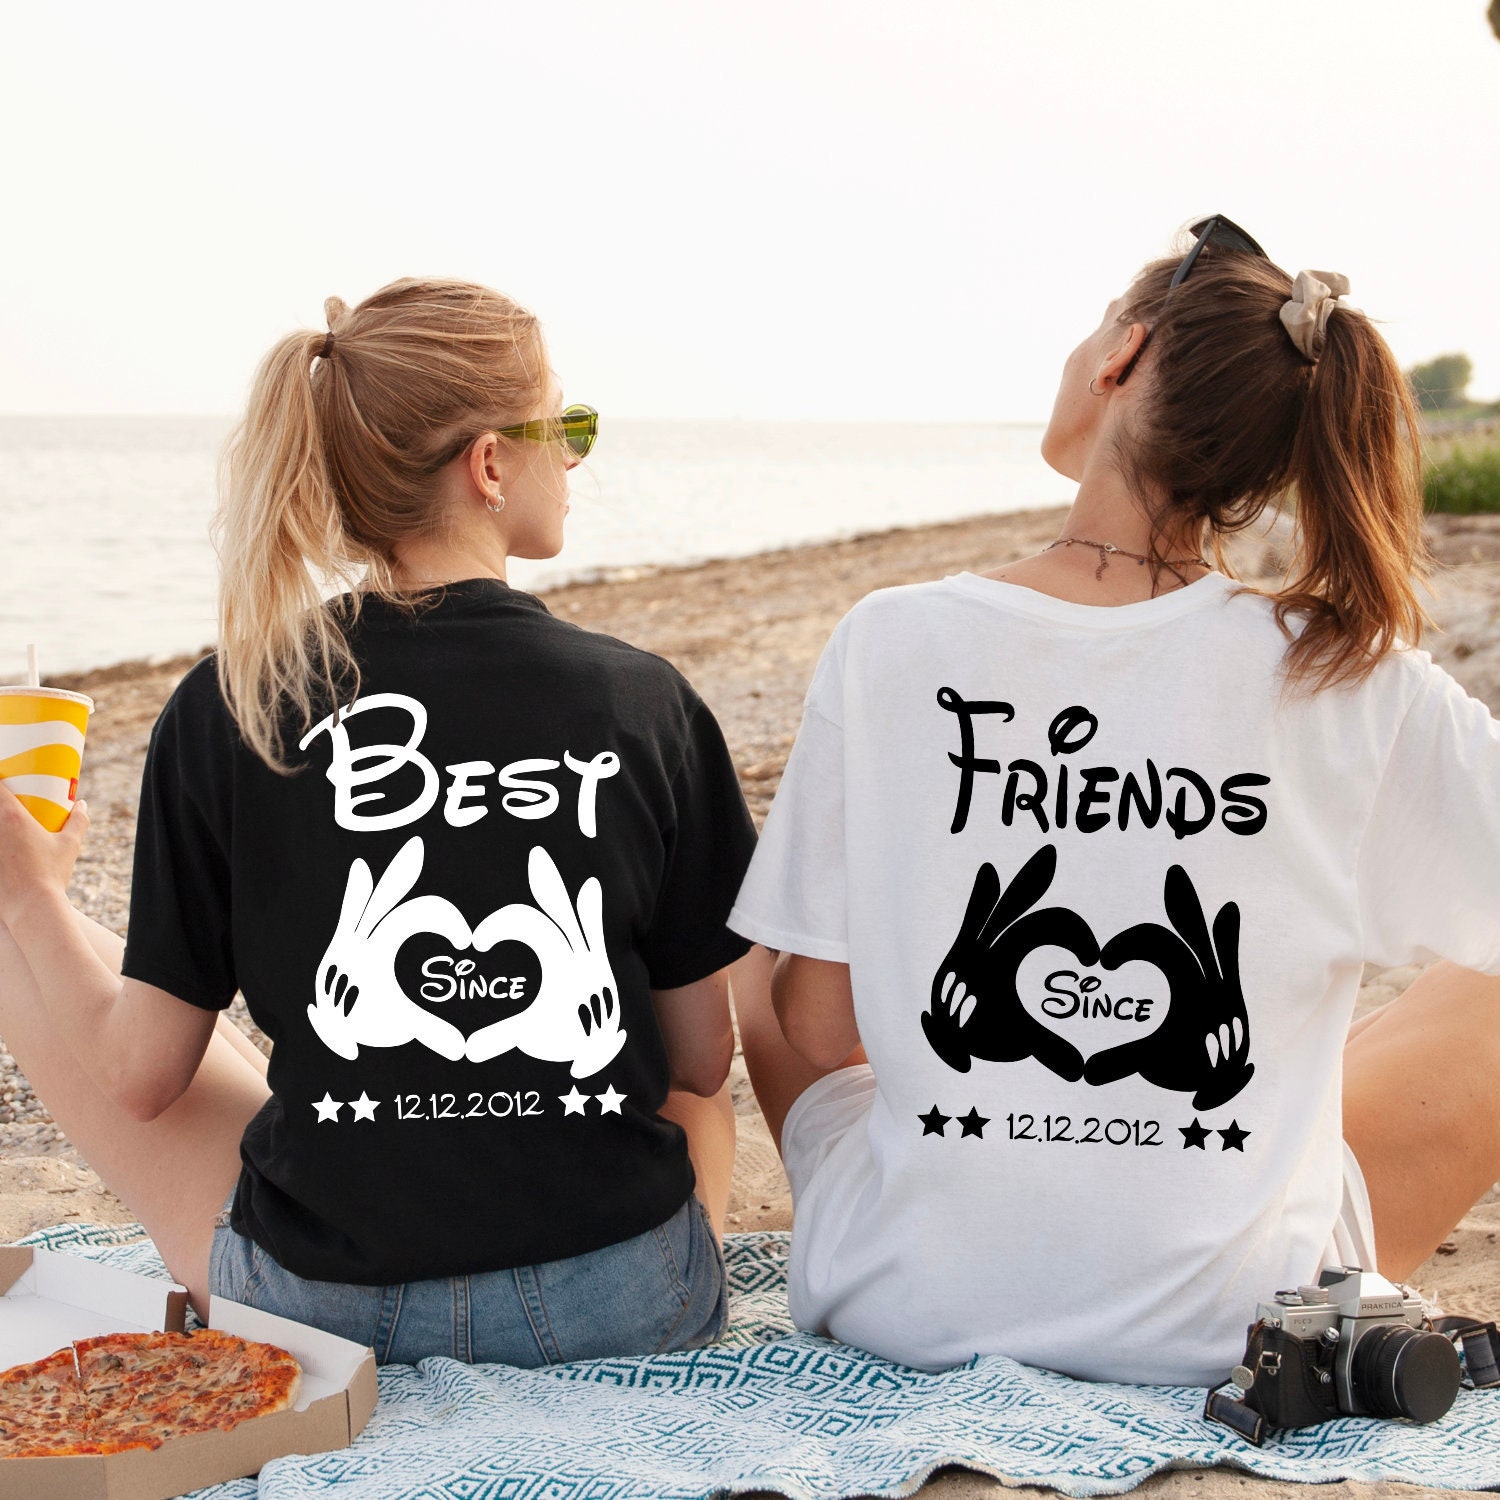 Best Friends T-shirts for Best Friends BFF Friendship Shirts With Desired  Date in a SET Couple Shirts Couple T-shirts Love XS 3XL - Etsy